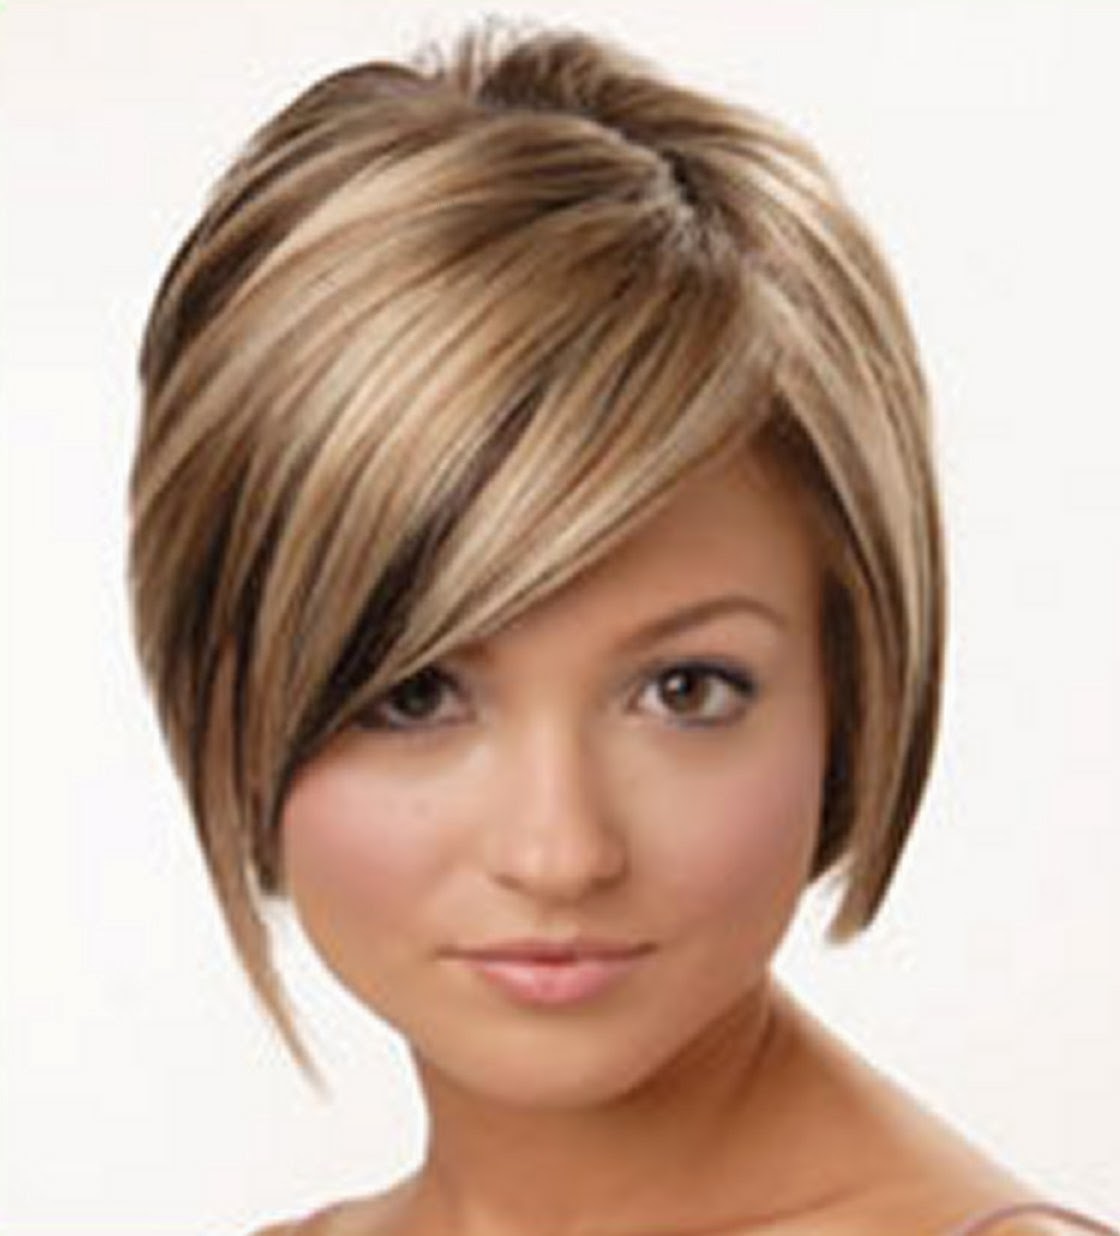 ... articles on long hairstyles, short hairstyles and curly hairstyles